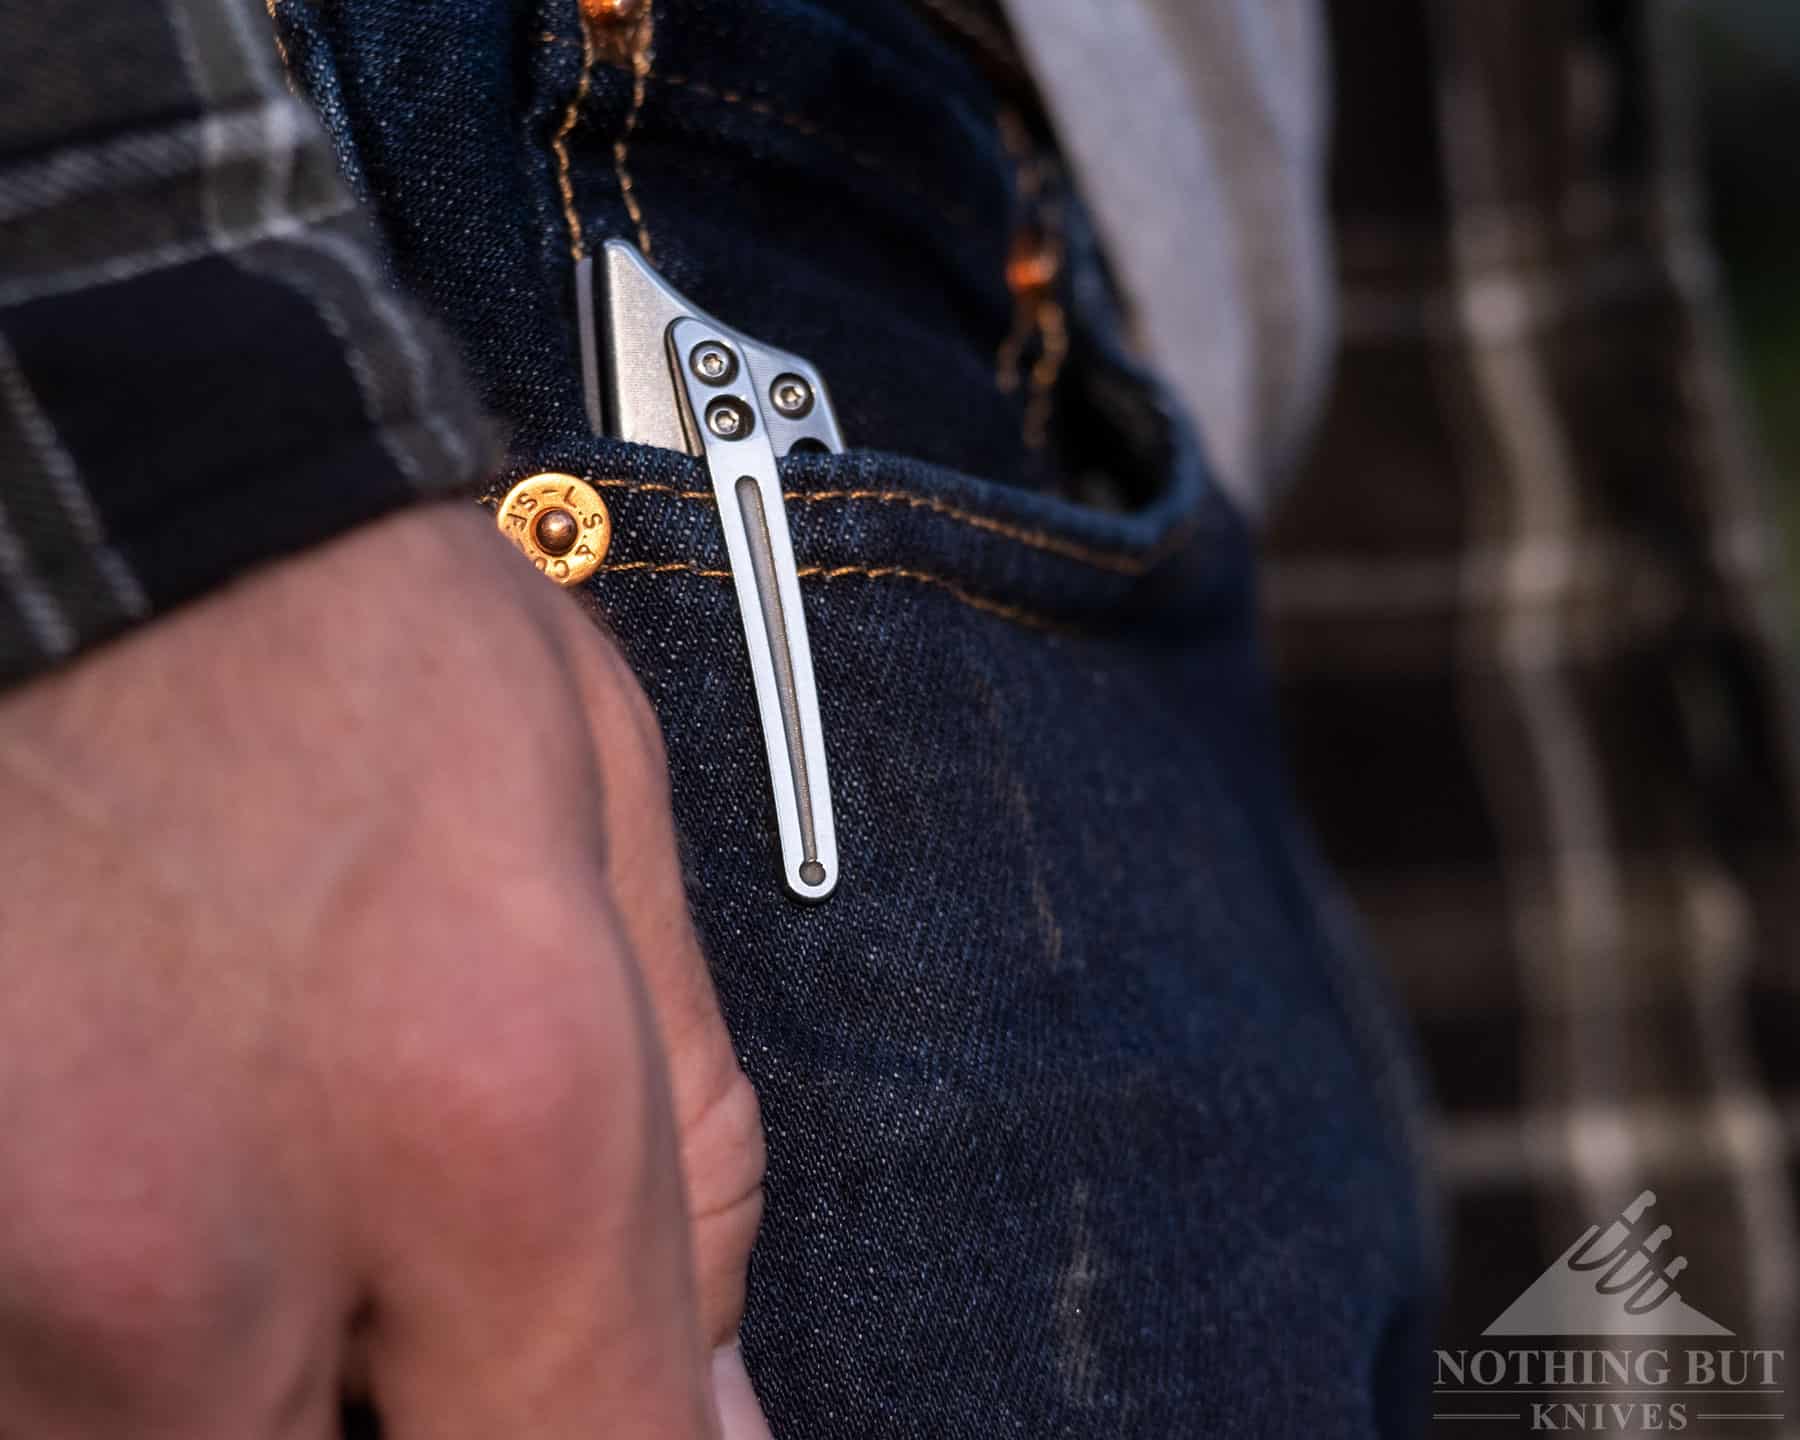 The Boker Plus HEA Hunter folding knife clipped into the pocket of a person's jeans. 